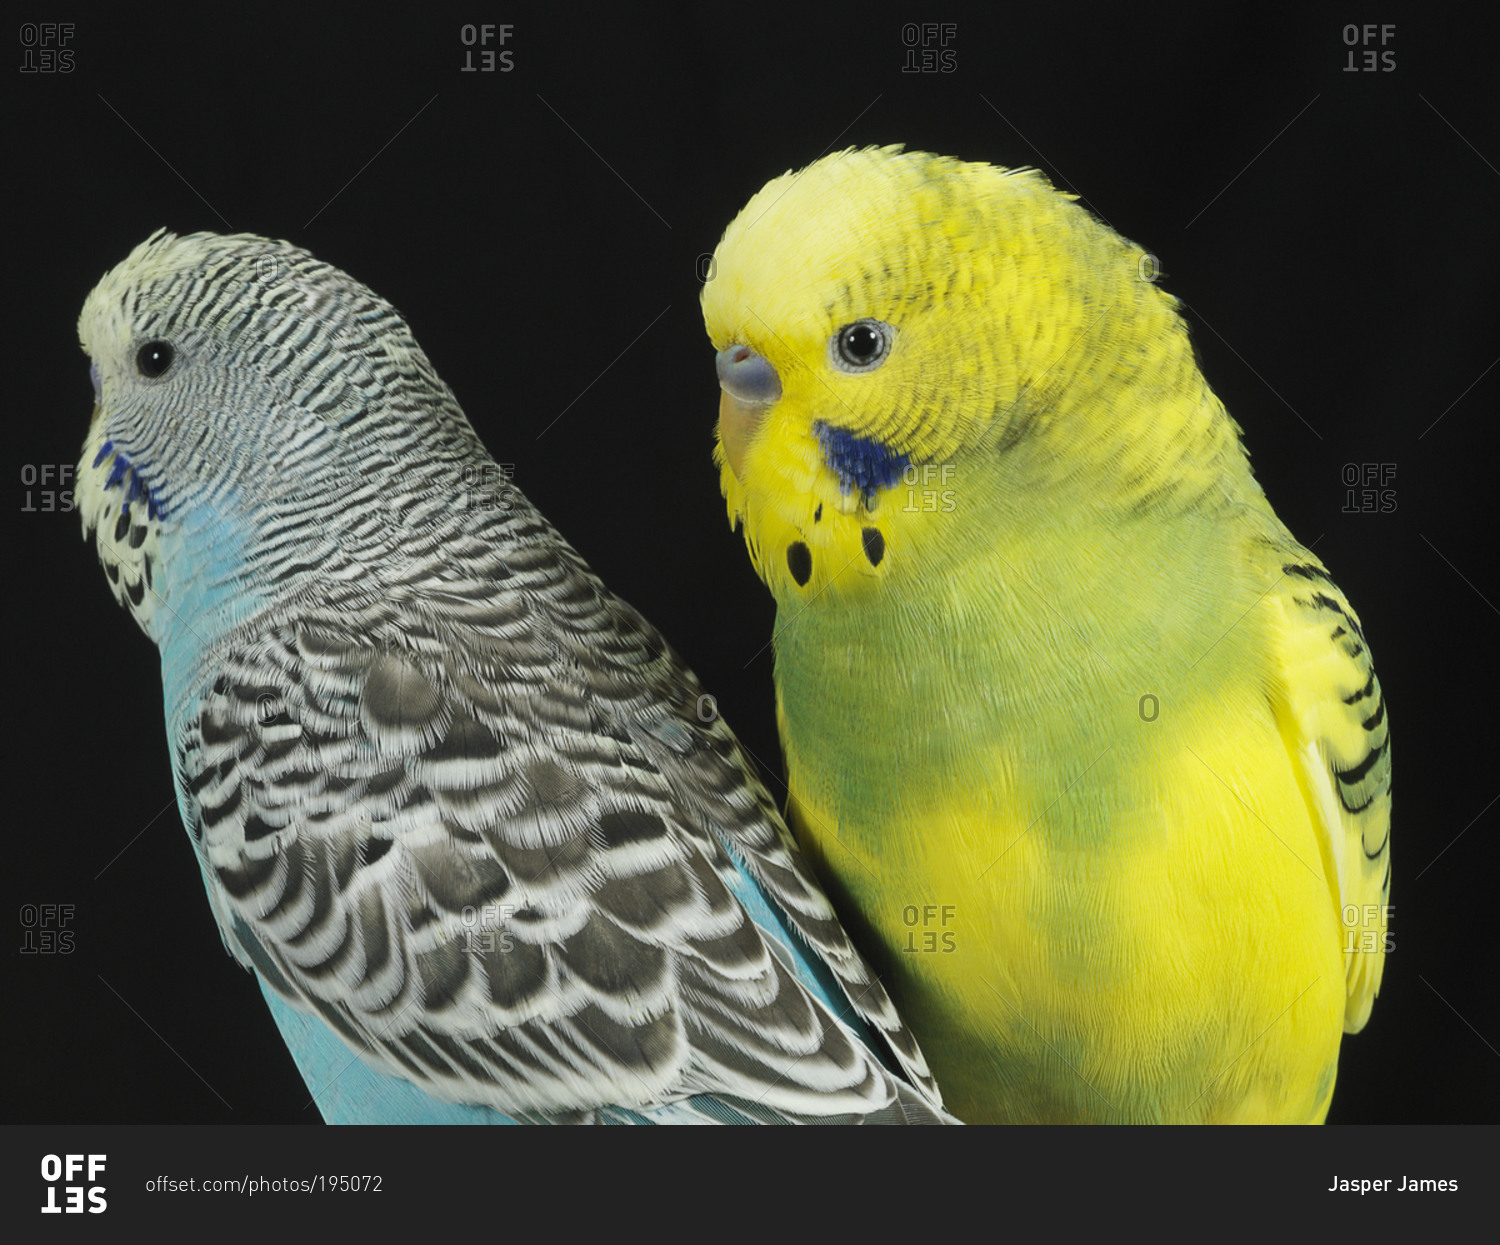 Two parakeets side-by-side